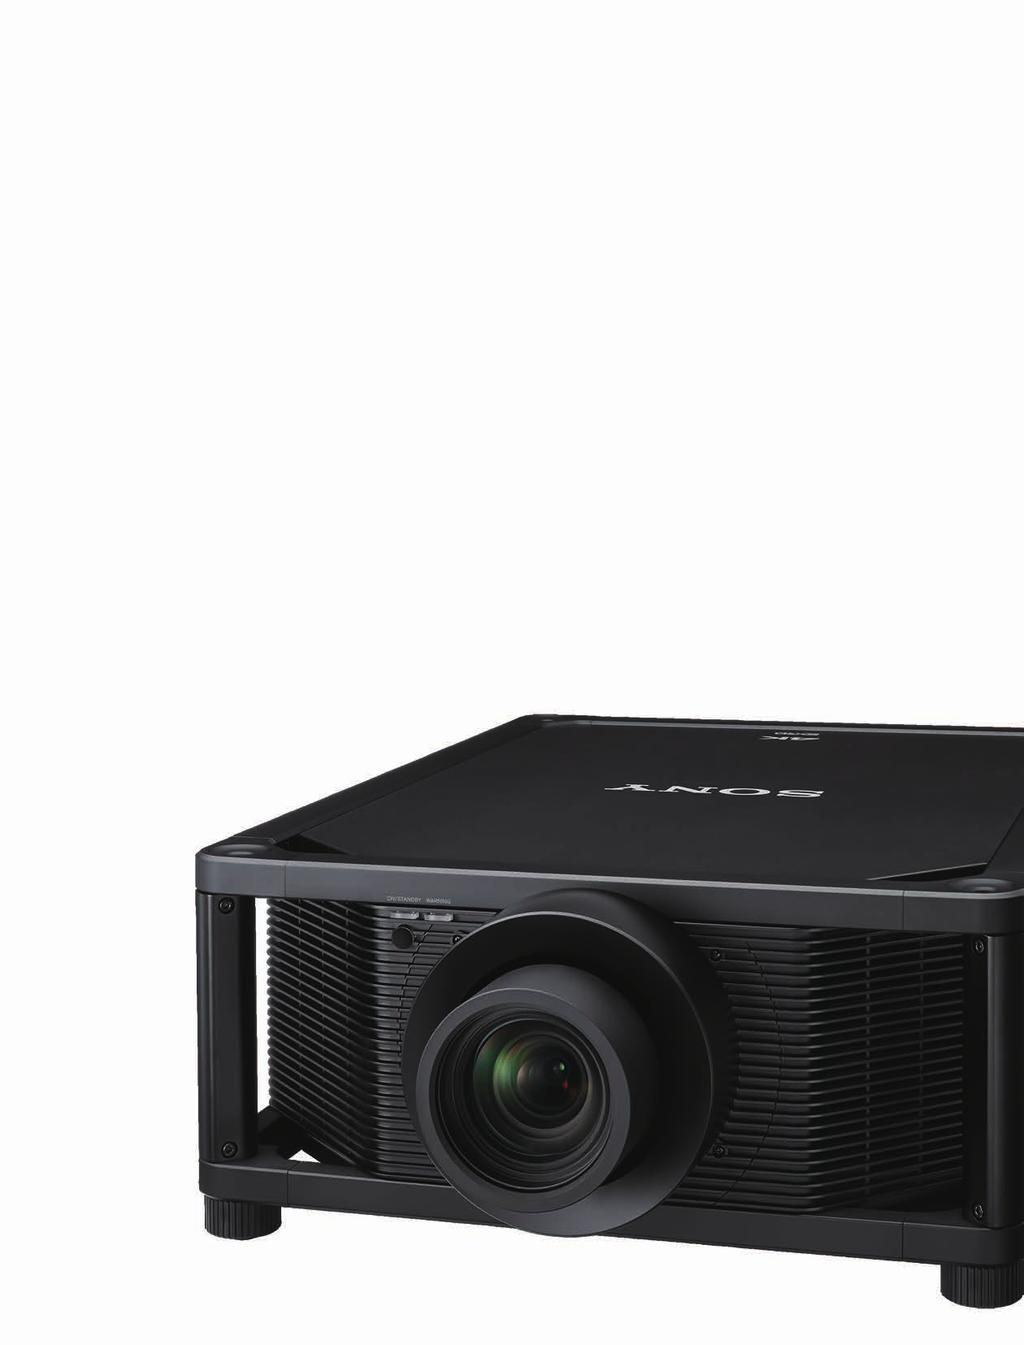 The world s Most Advanced Home Cinema Projector: Spectacular Brightness and Native 4K Clarity It s an unforgettable experience, whatever you re watching.